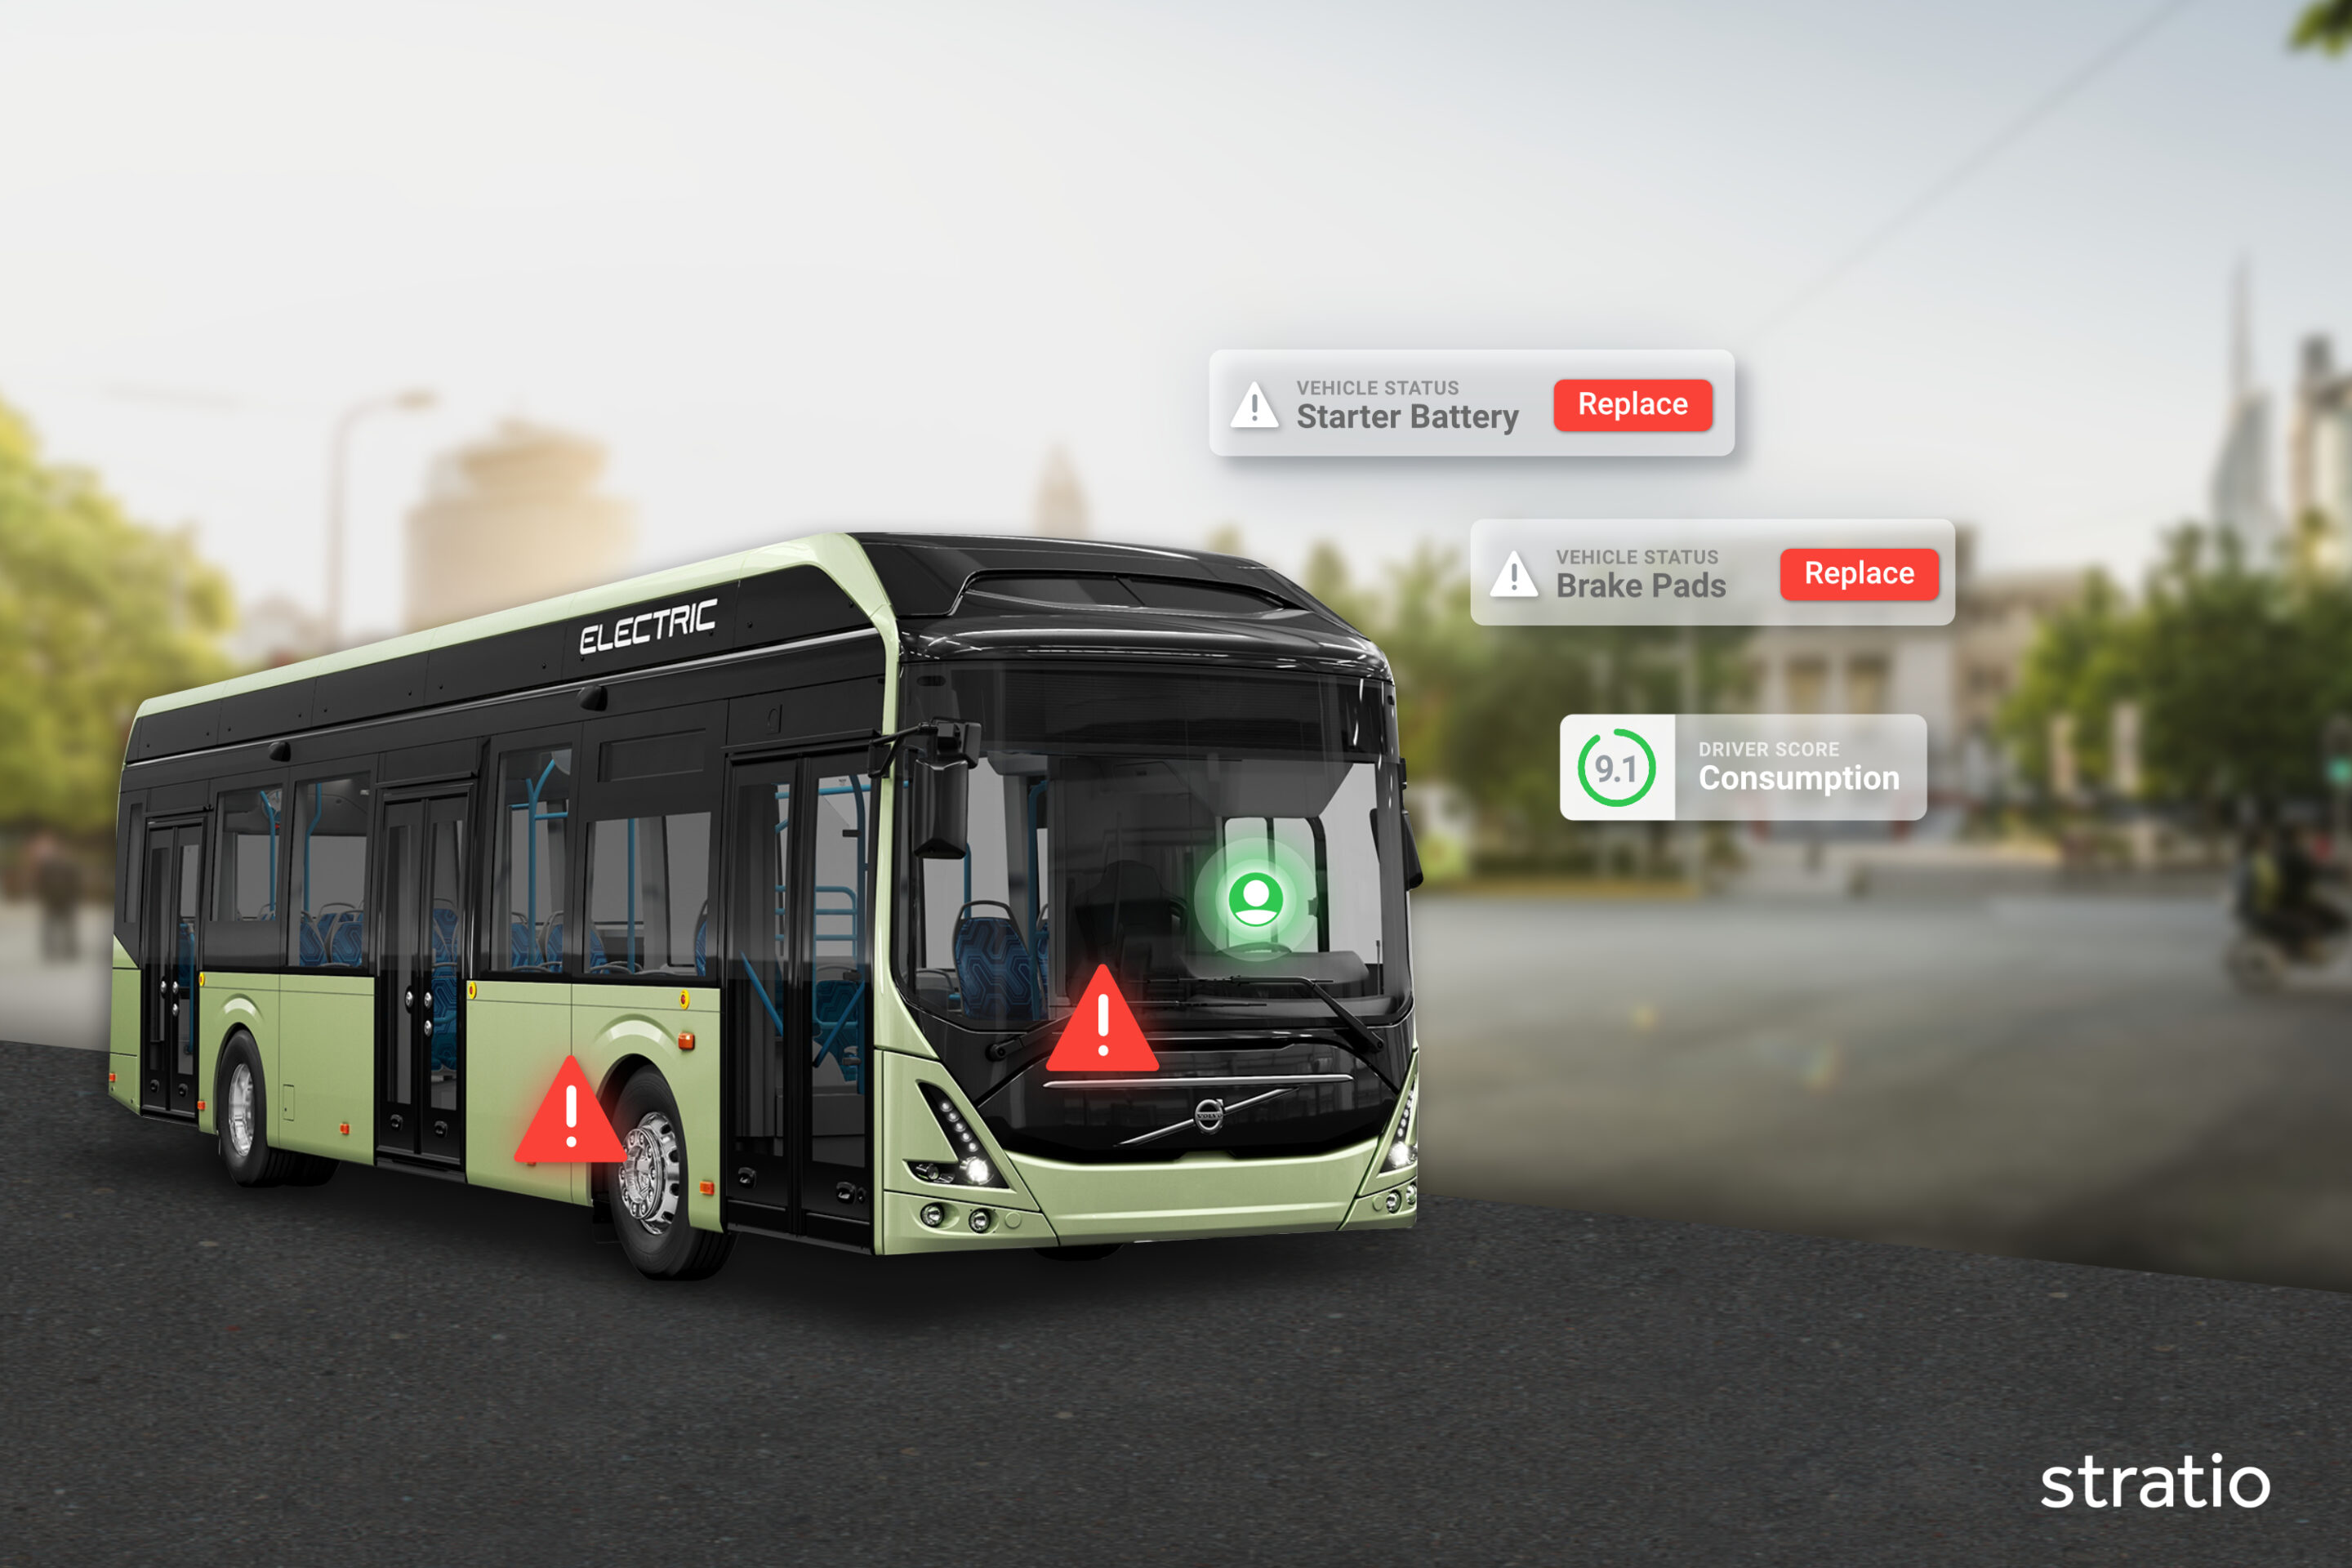 An electric bus with predictive alerts